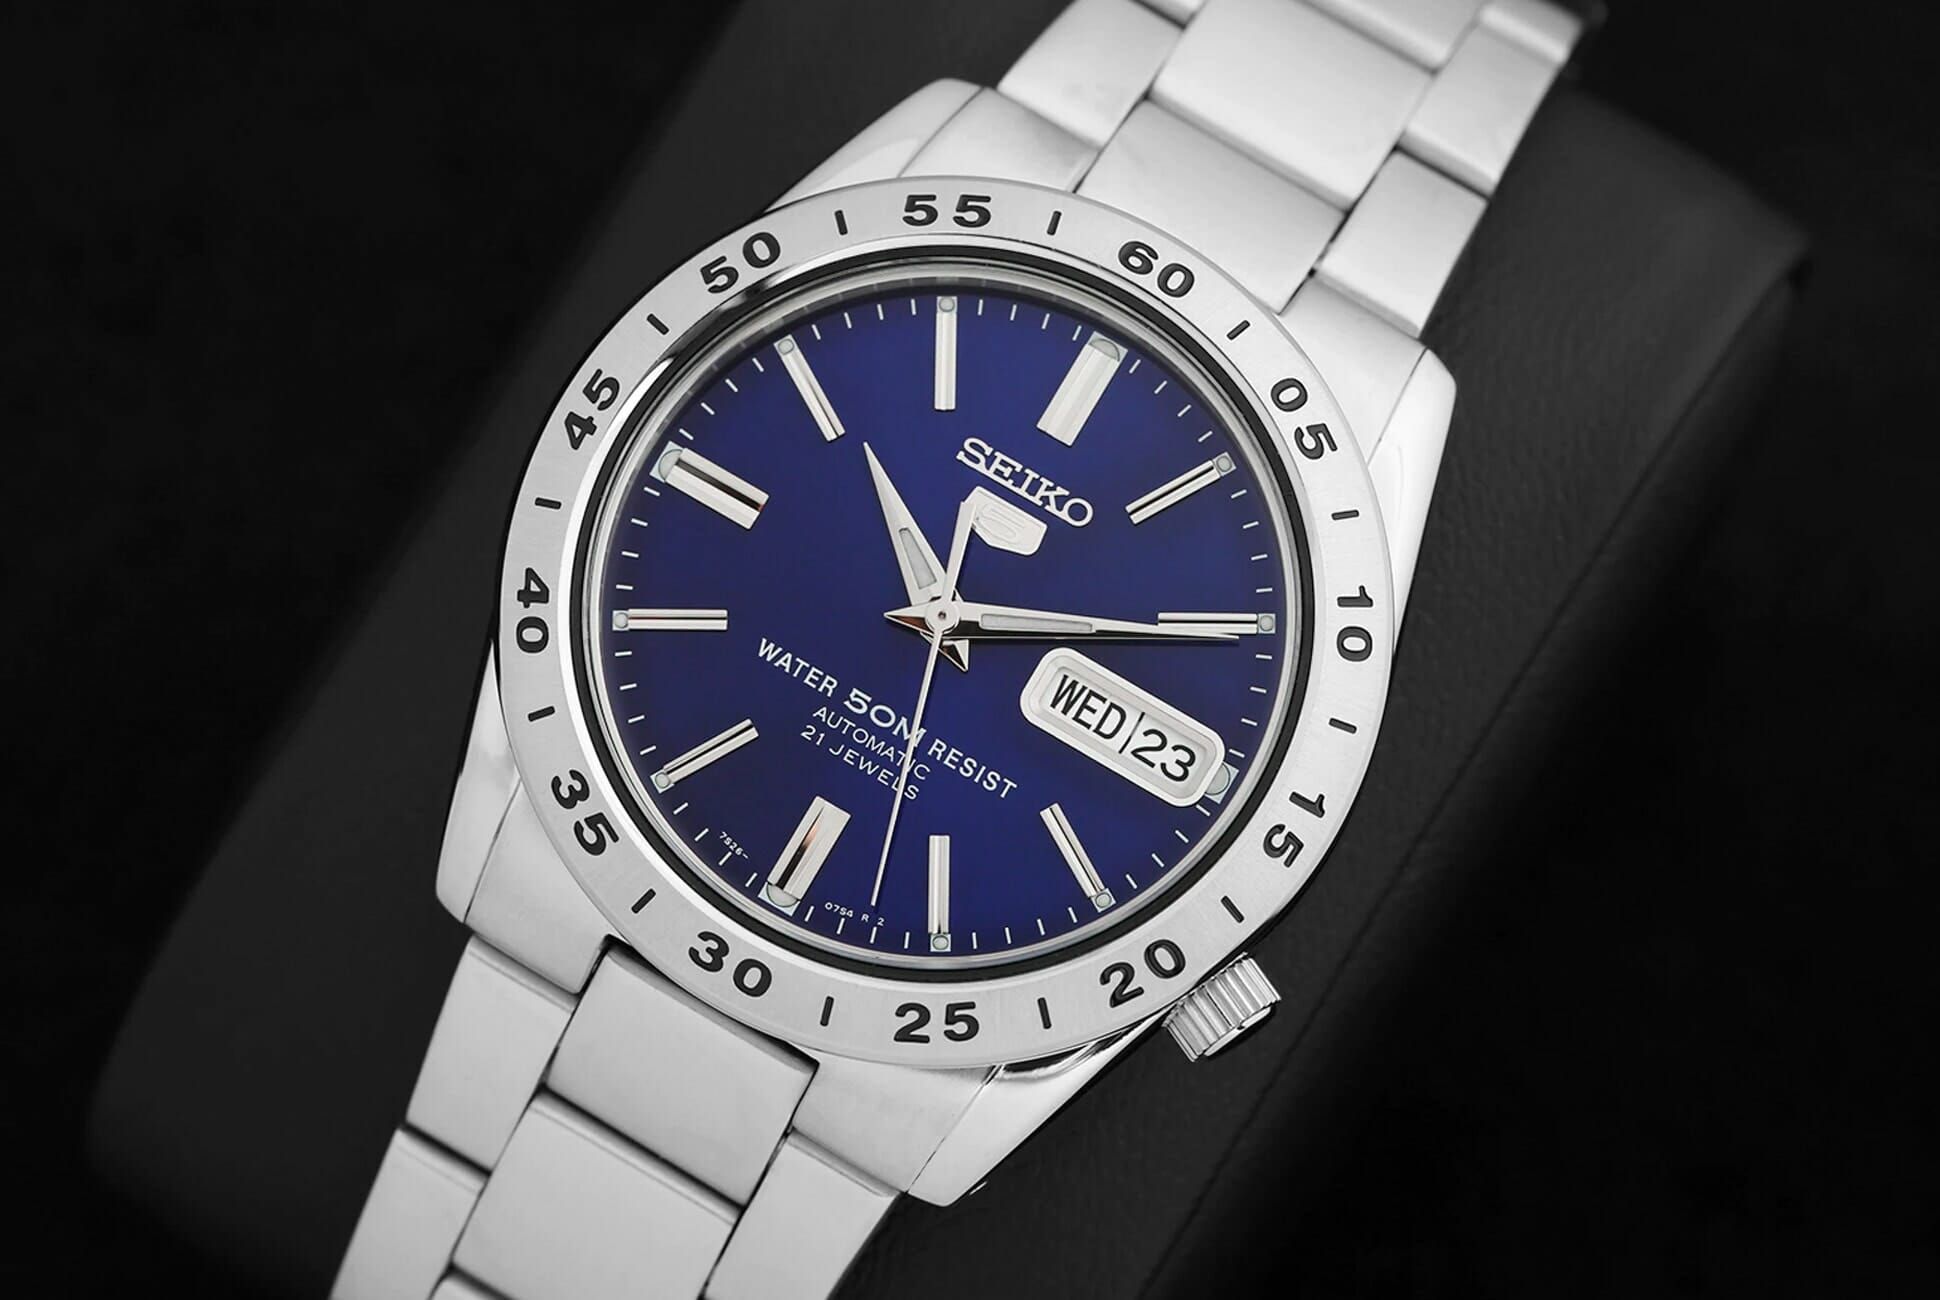 $77 Will Get You This Seiko 5 Automatic Watch on a Bracelet